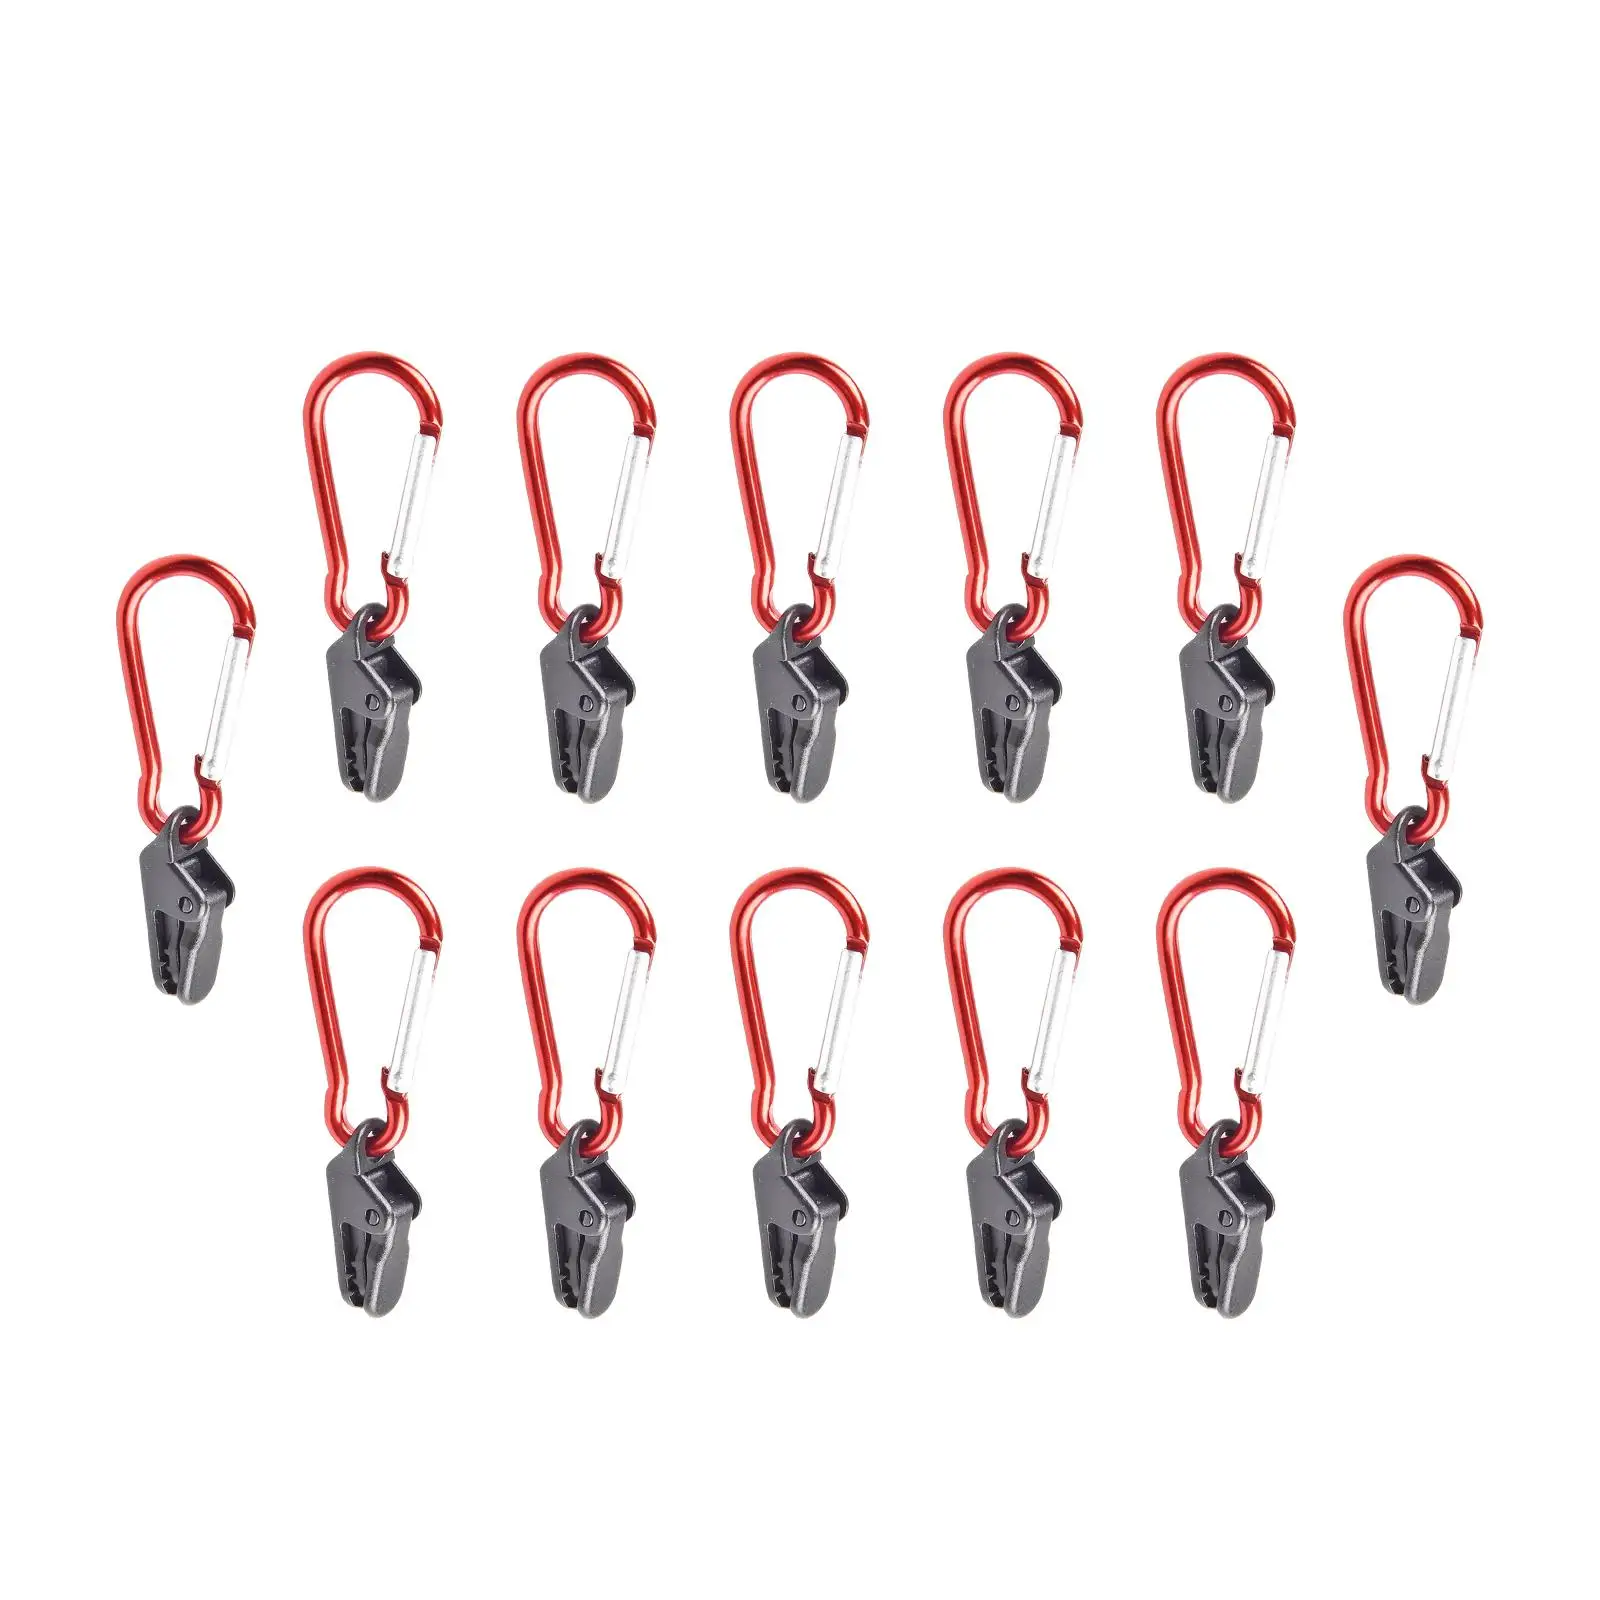 12 Pieces Camping Tent Snaps Clip with Carabiner Waterproof Versatile Practical Tent Accessories Awning Clamp for Awning